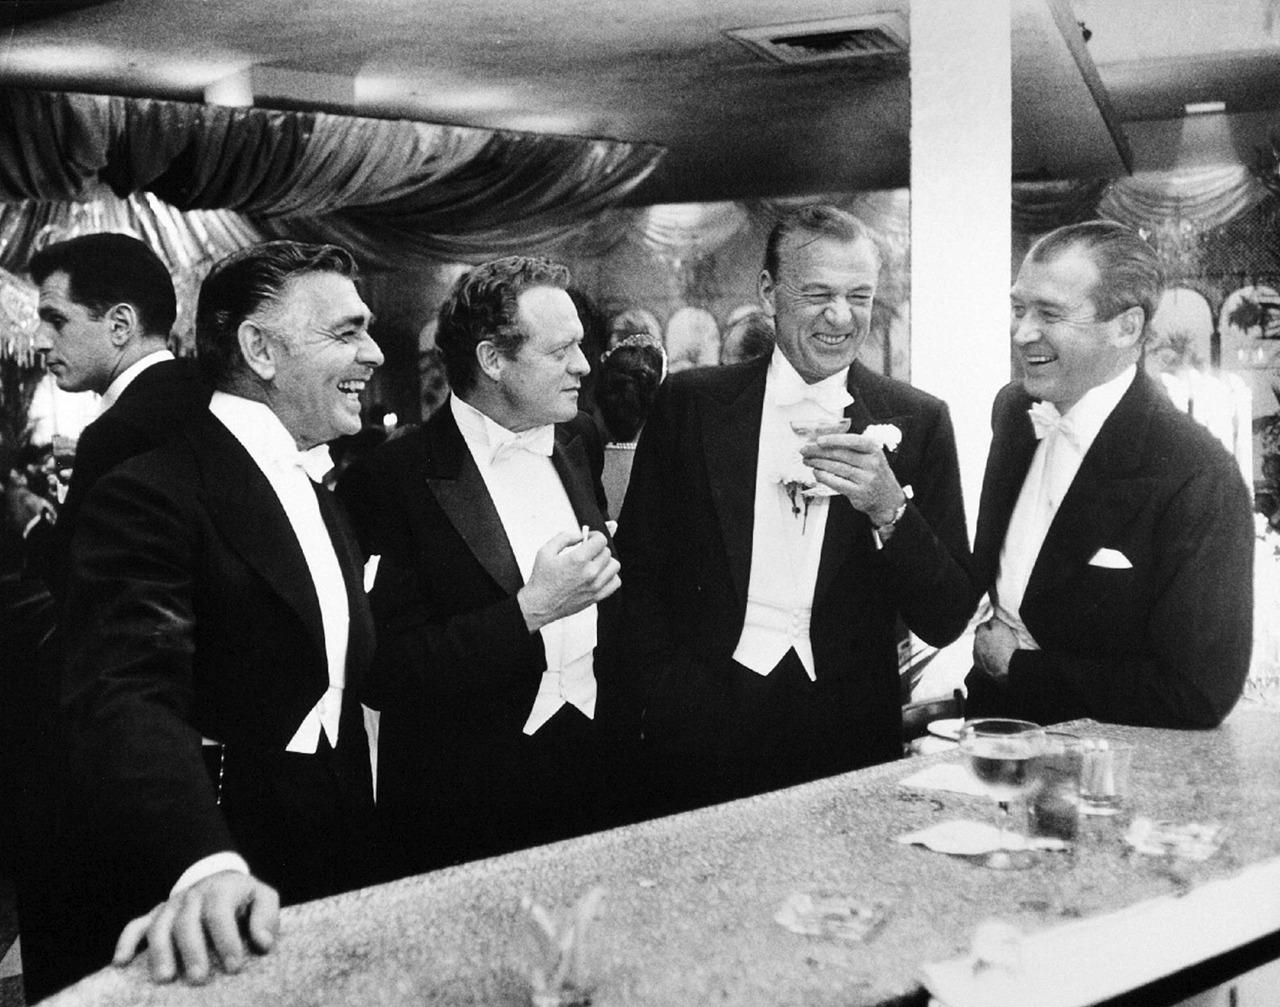 Clark Gable, Van Heflin, Gary Cooper and Jimmy Stewart. New Year’s Eve 1957 in the Crown Room at Romanoff’s restaurant in Hollywood.jpg